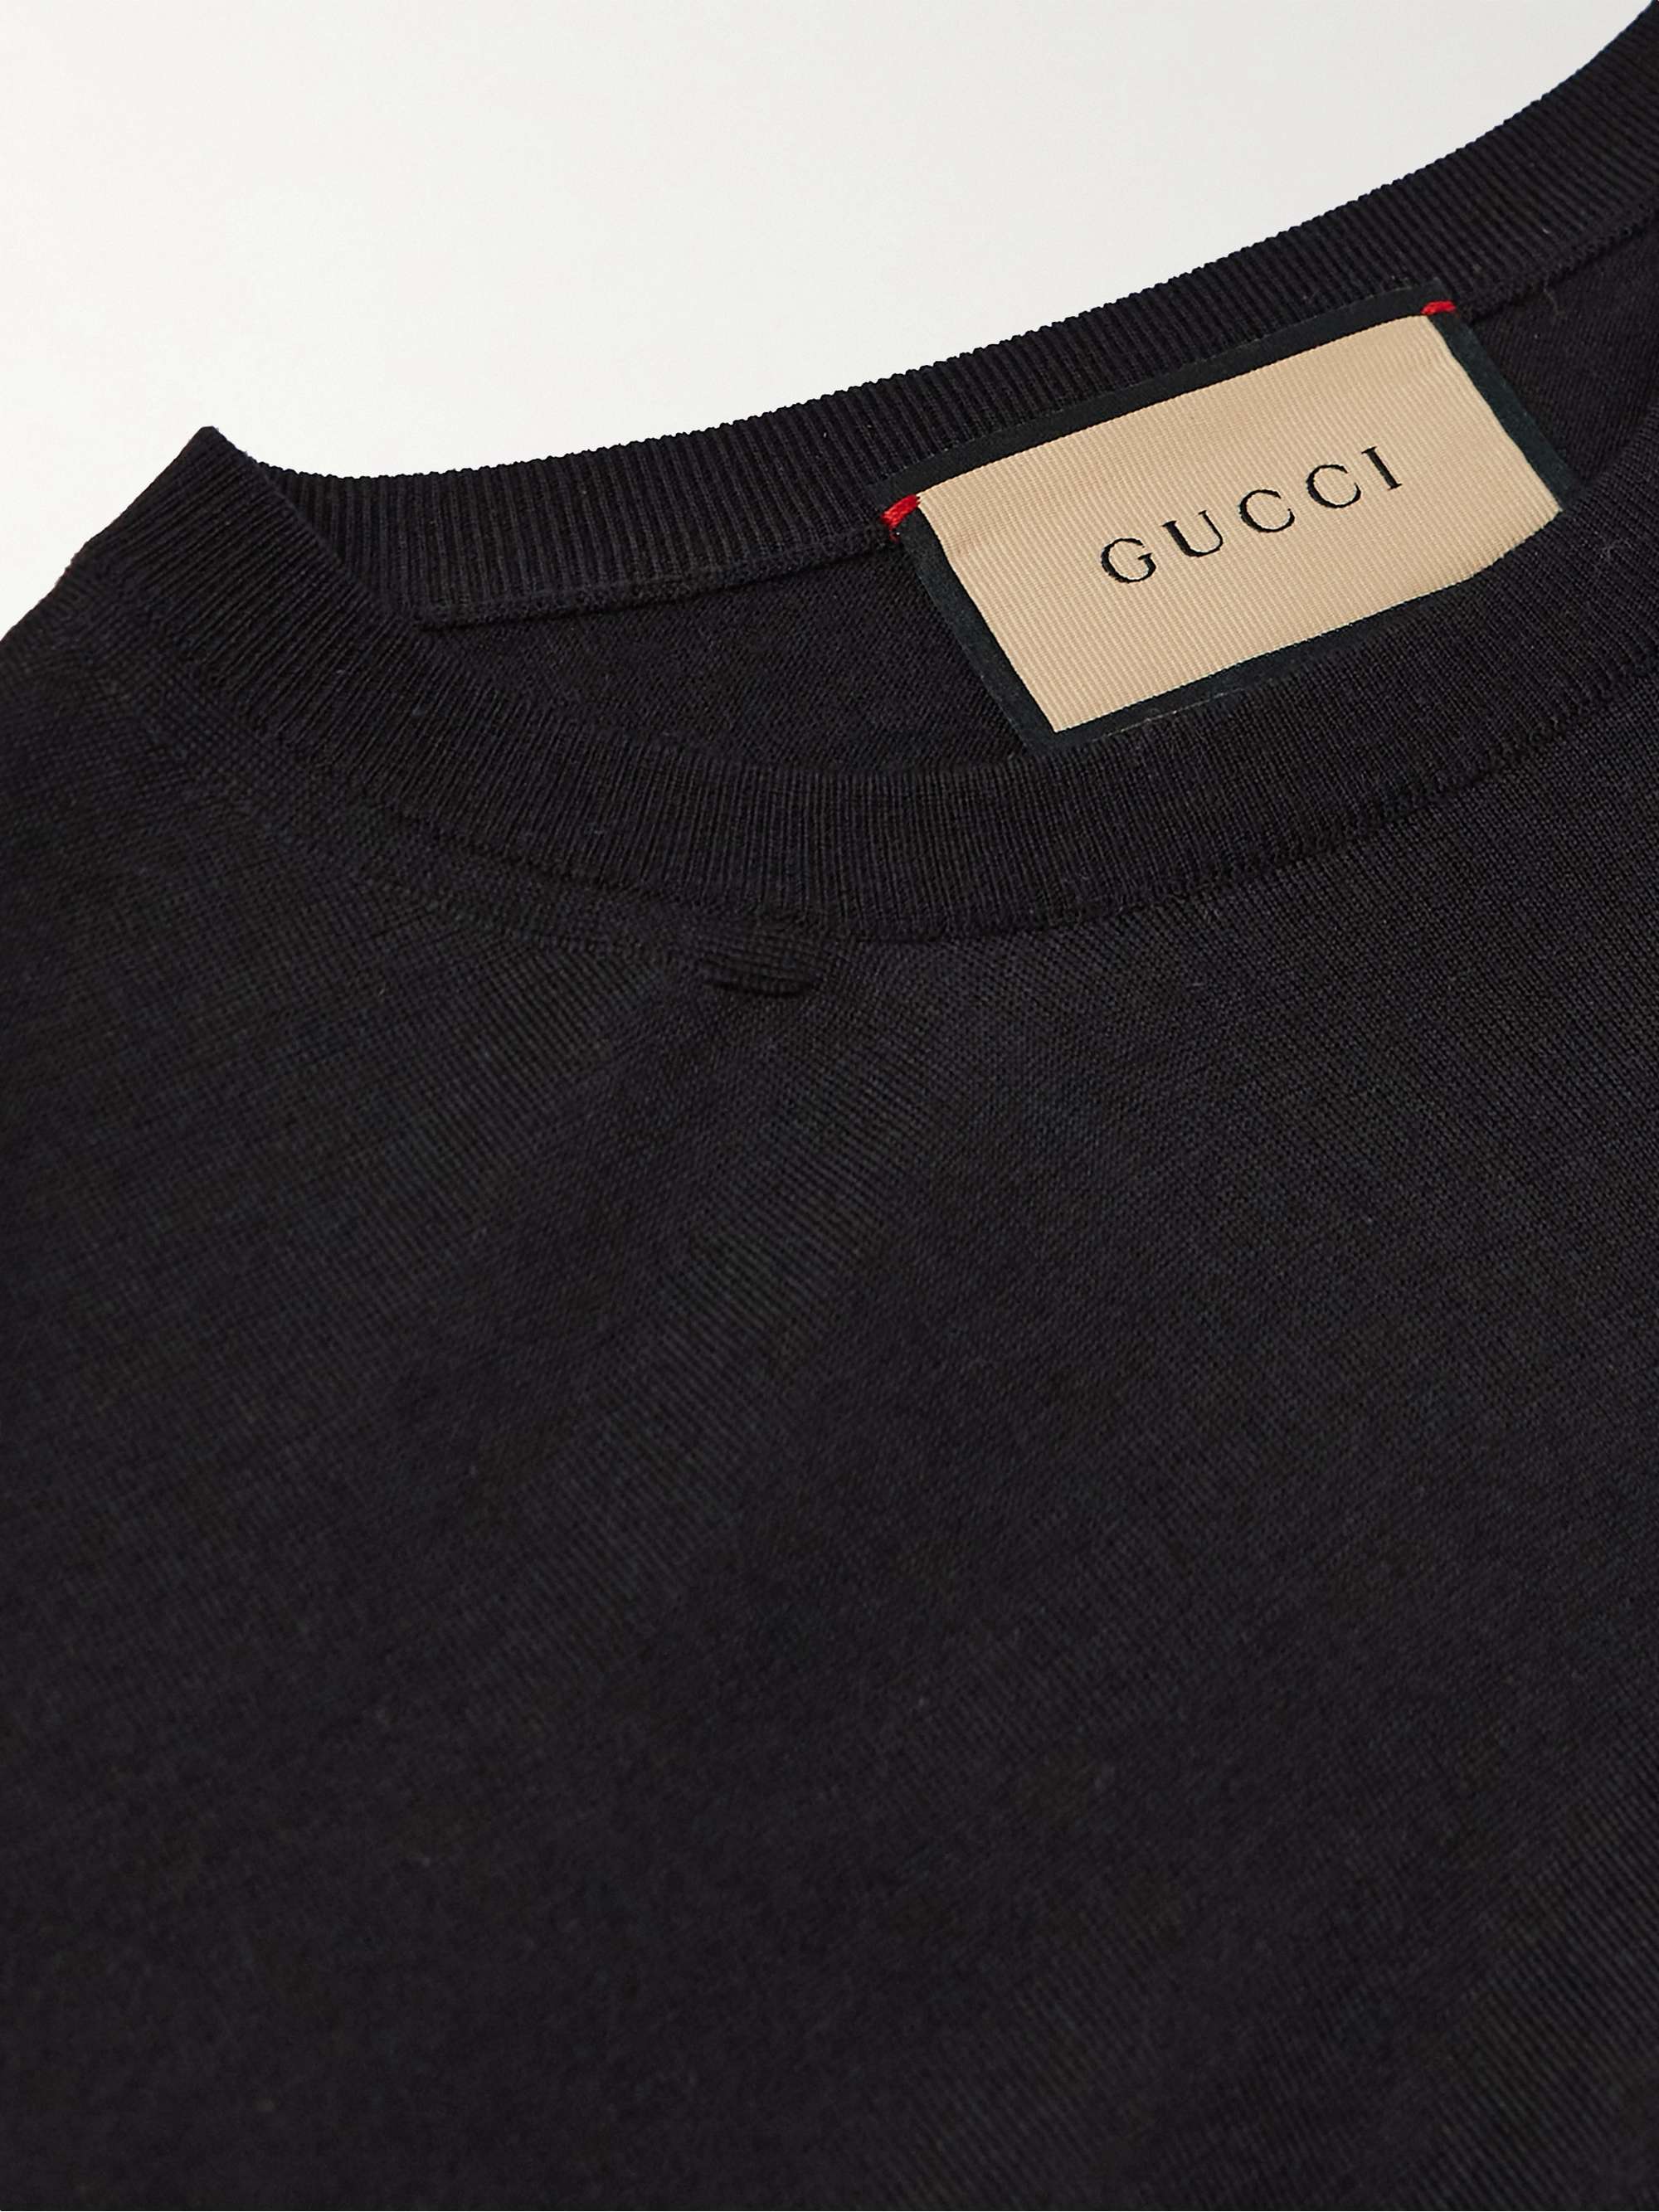 GUCCI Logo-Embroidered Wool Sweater